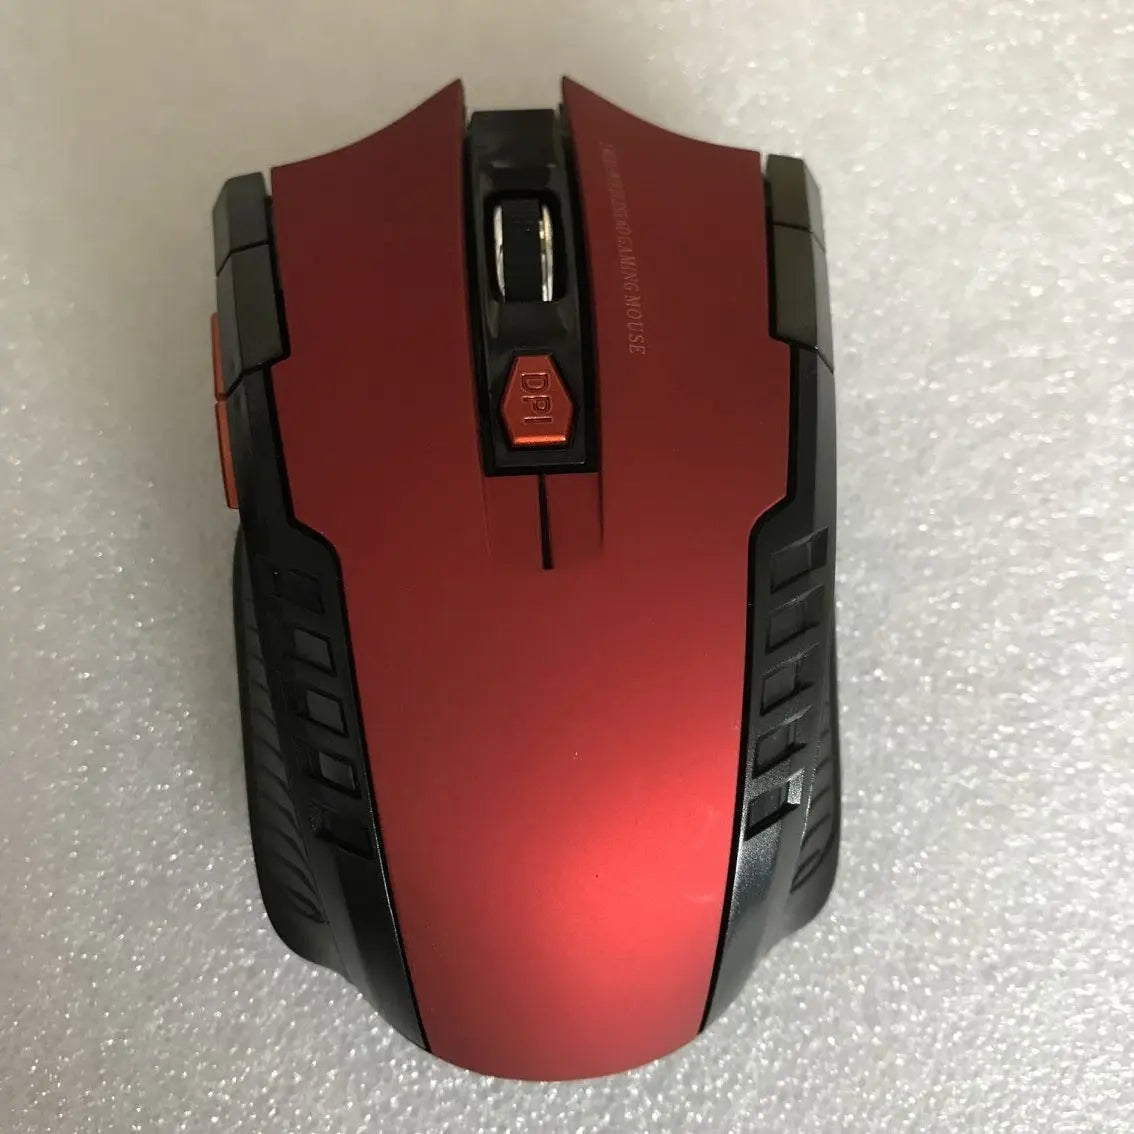 Optical Mechanical Mouse, Electric Mouse Gaming, Wireless cj